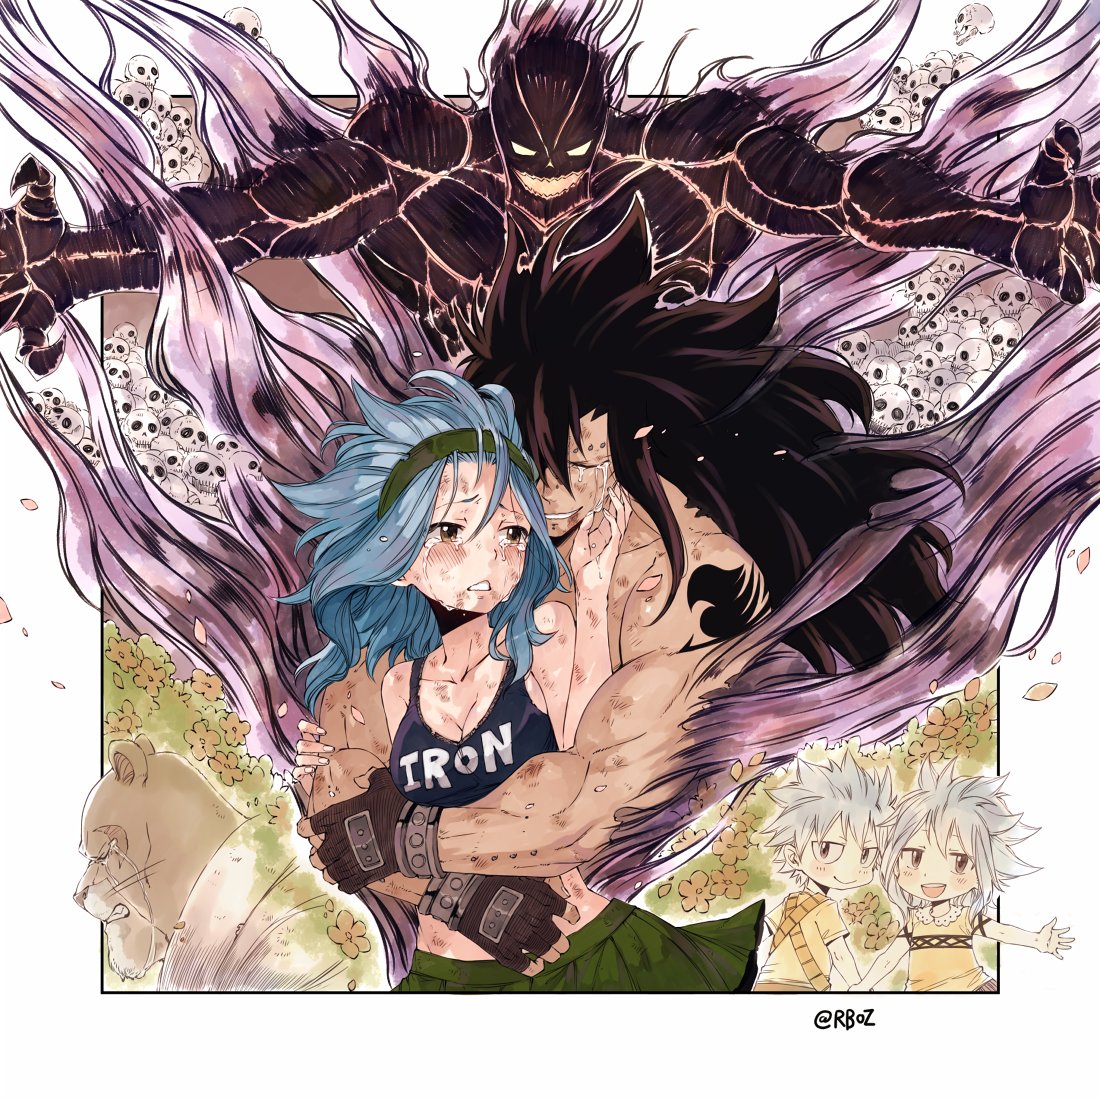 3boys black_gloves black_hair blue_hair blush breasts bruise cleavage closed_eyes crop_top crying crying_with_eyes_open fairy_tail fingerless_gloves gajeel_redfox gloves headband holding_hands hug hug_from_behind injury levy_mcgarden long_hair medium_breasts miniskirt multiple_boys multiple_girls outstretched_arm outstretched_arms pantherlily pleated_skirt rusky shirt short_sleeves simple_background skirt sleeveless sleeveless_shirt sleeves standing tattoo tears very_long_hair yellow_shirt